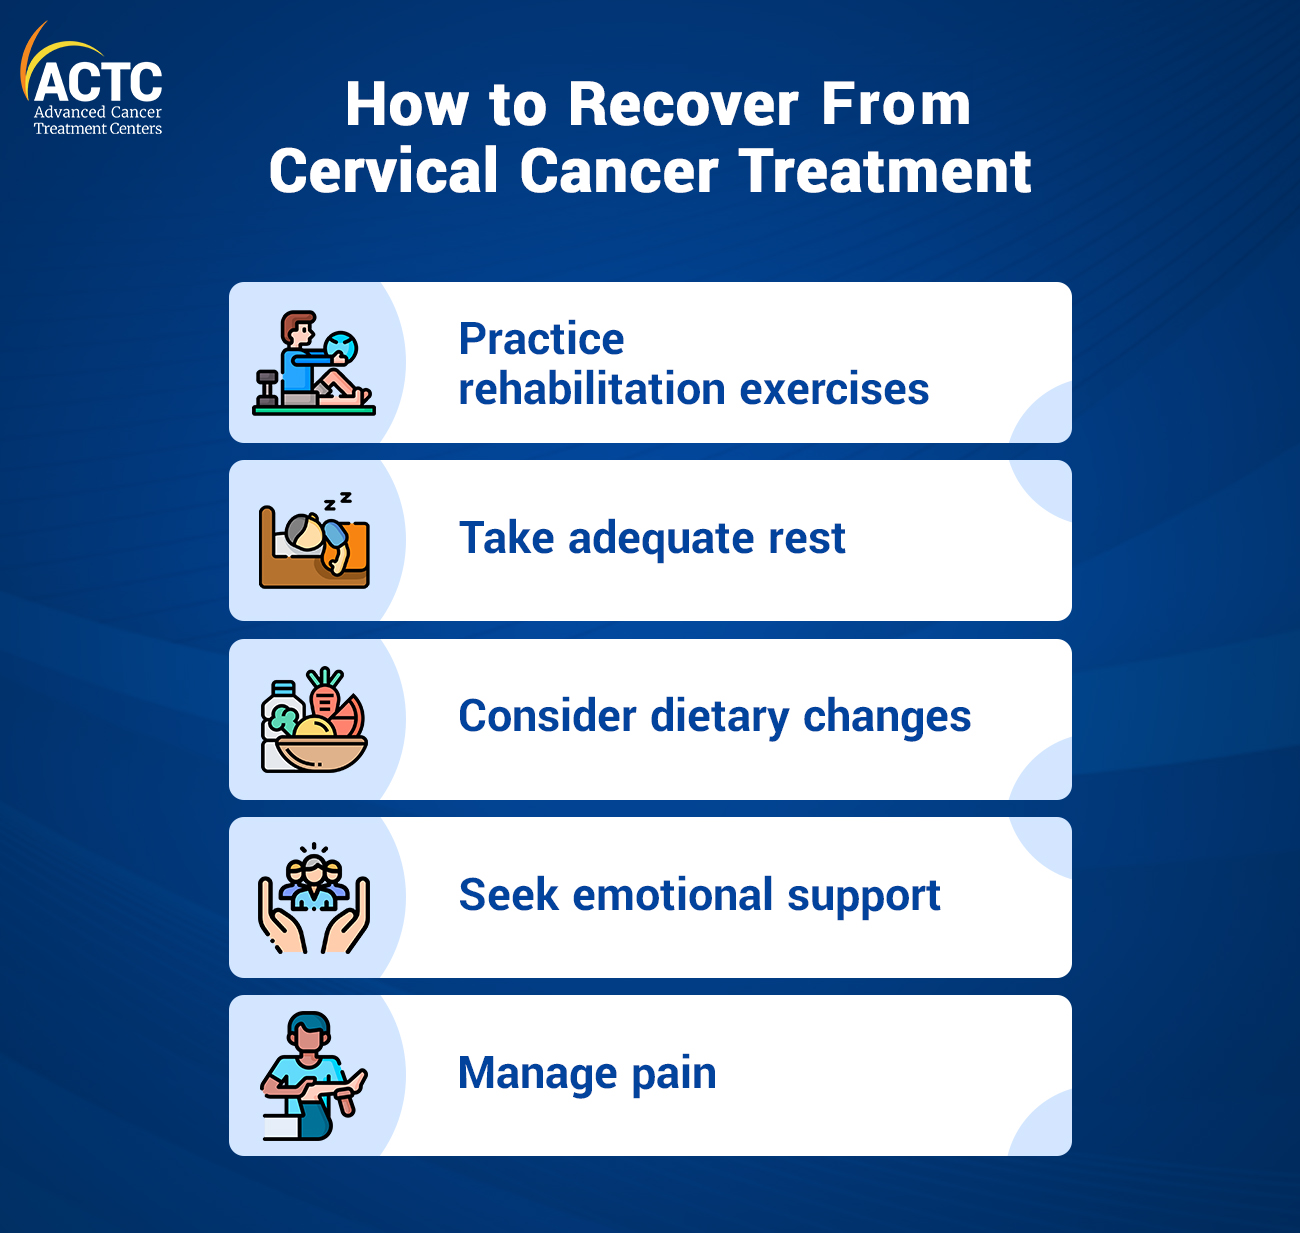 How to Recover from Cervical Cancer Treatment